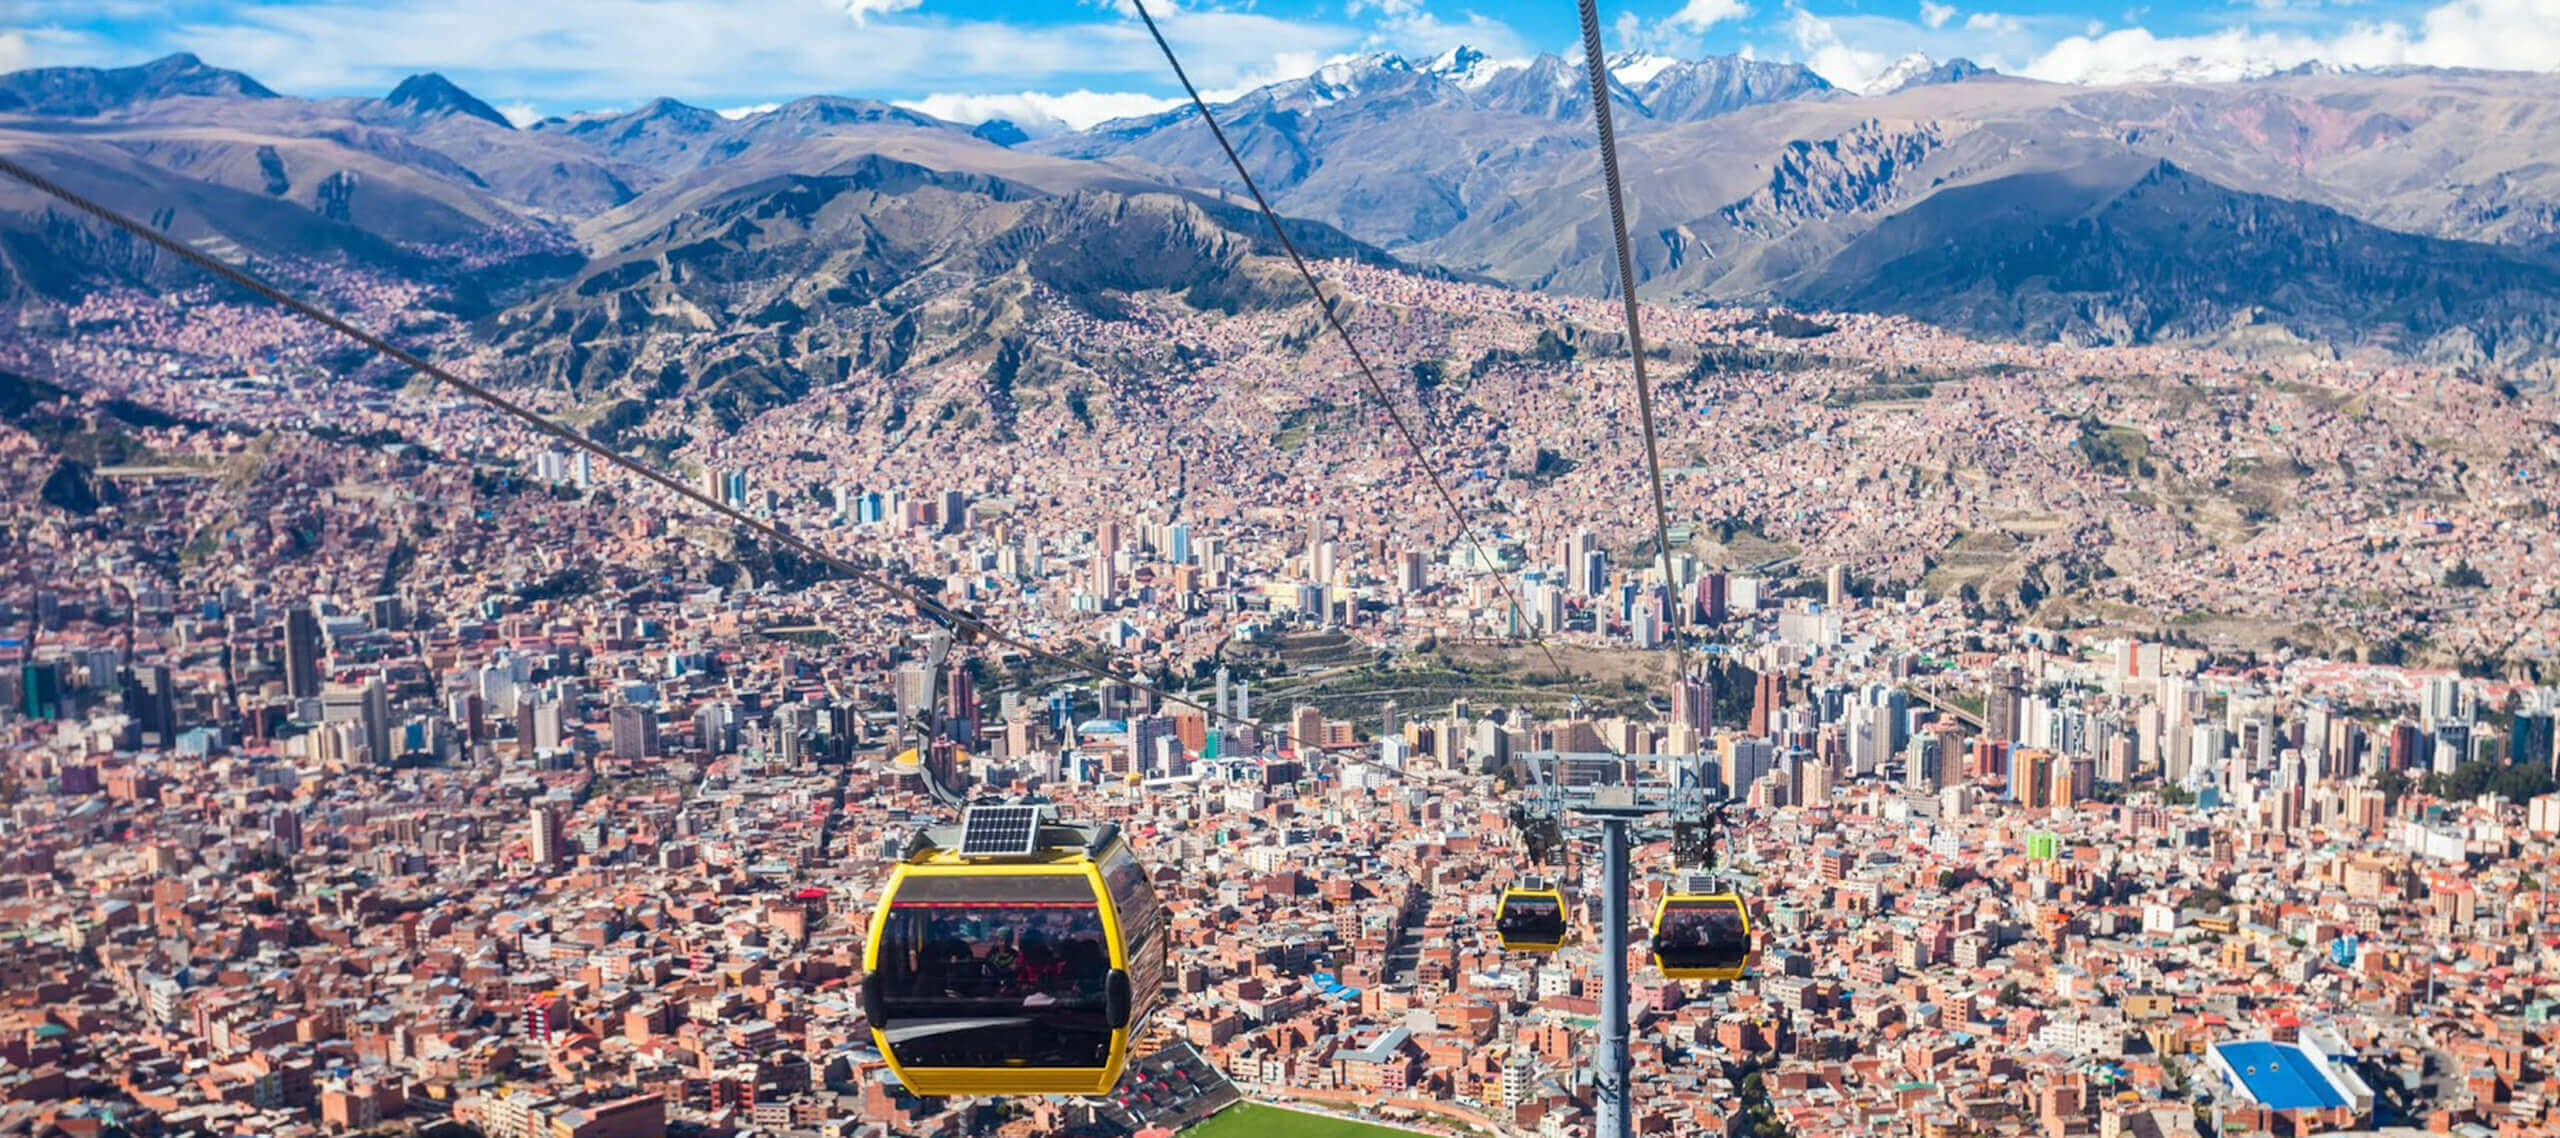 dating in la paz bolivia cable car